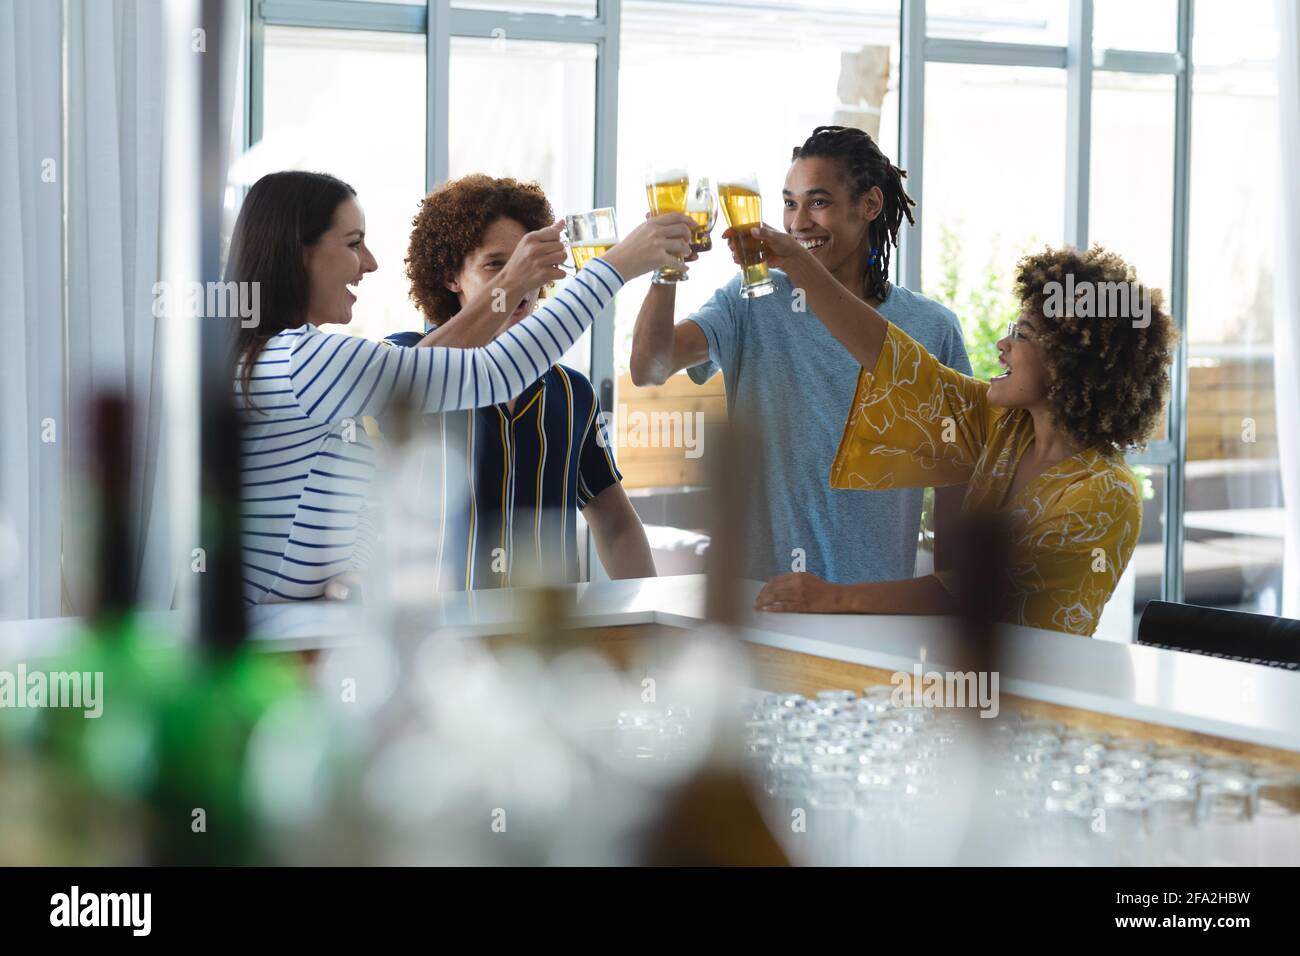 Diverse group of male and female colleagues raising glasses of beer at bar Stock Photo